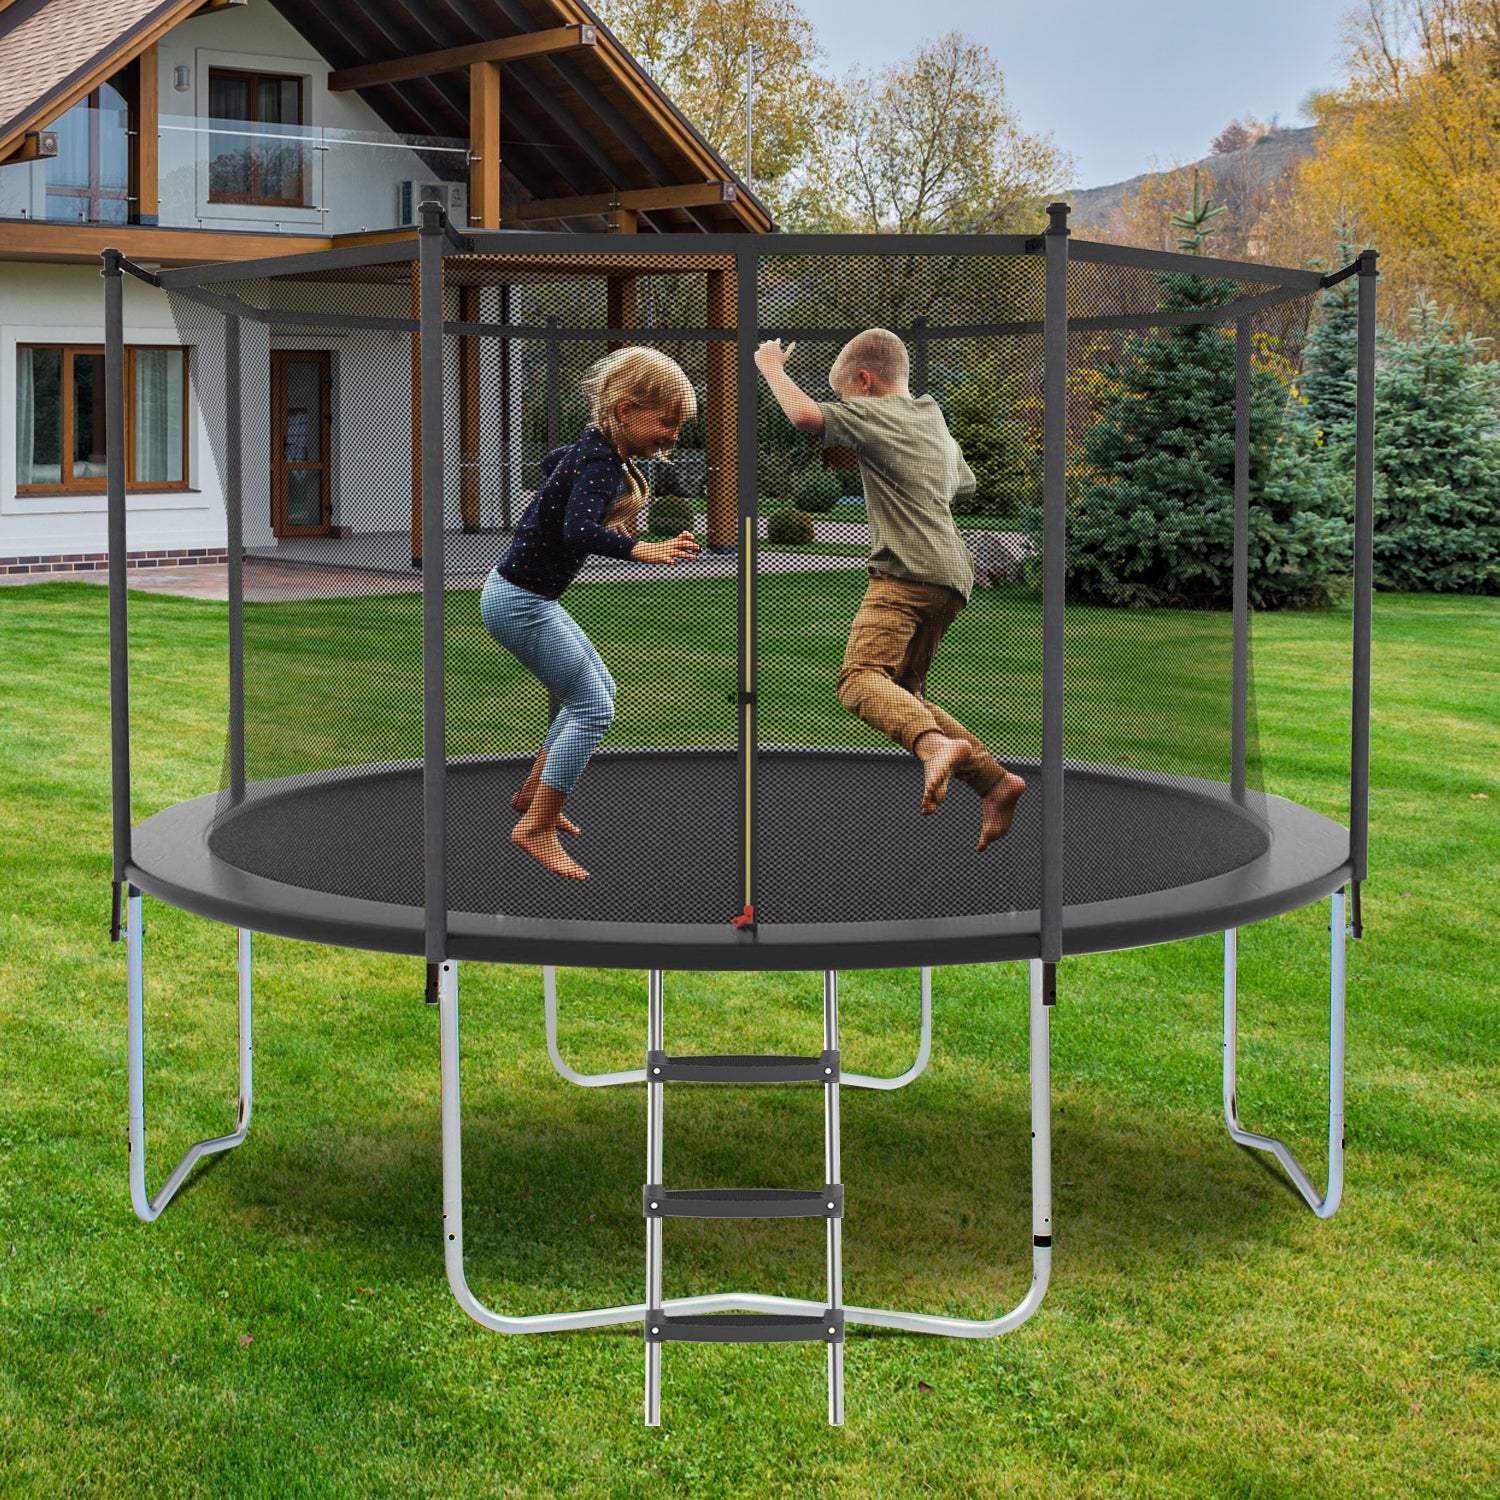 16FT Trampoline with Safety Enclosure Net, Outdoor gray-wear-resistant-garden & outdoor-iron